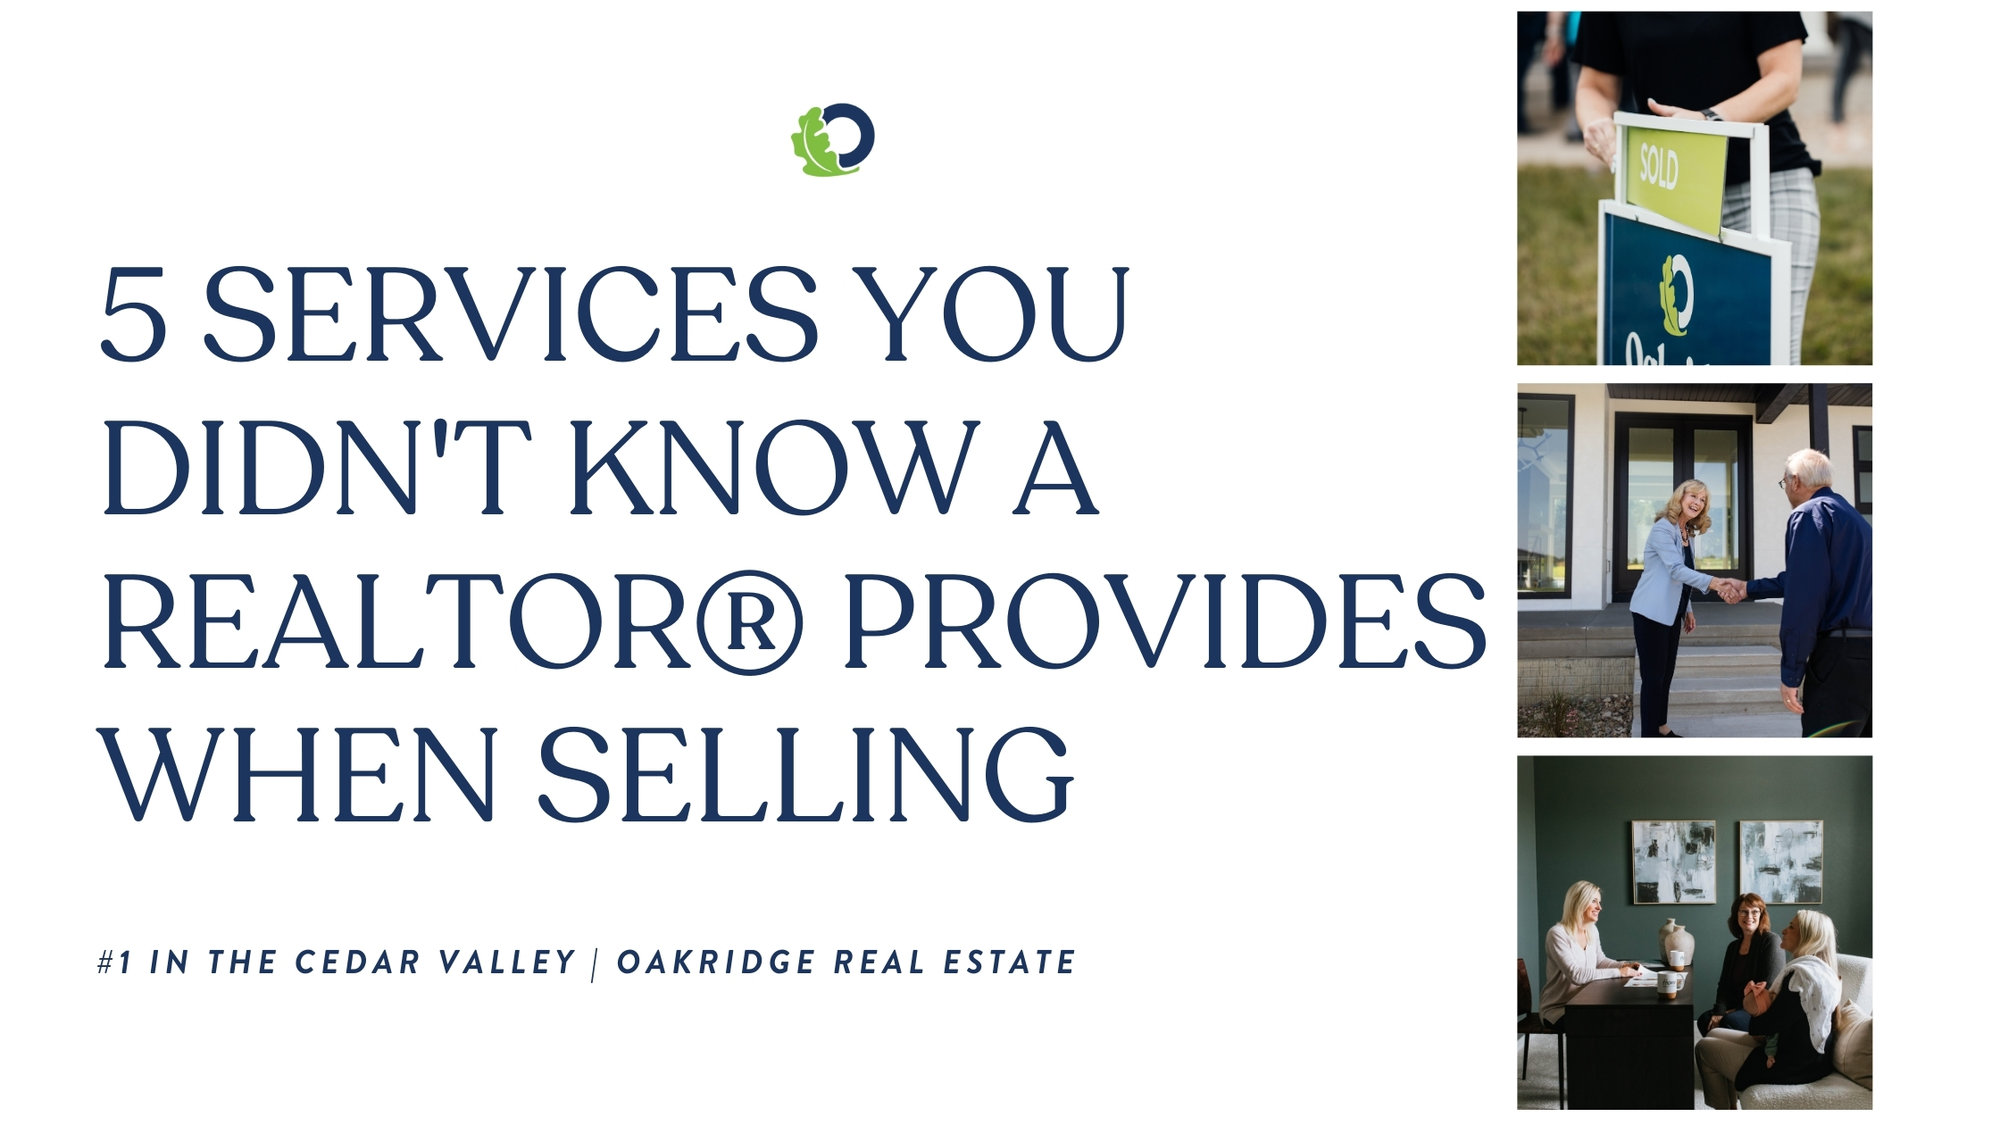 5 services you didn't know a realtor provides when selling your home